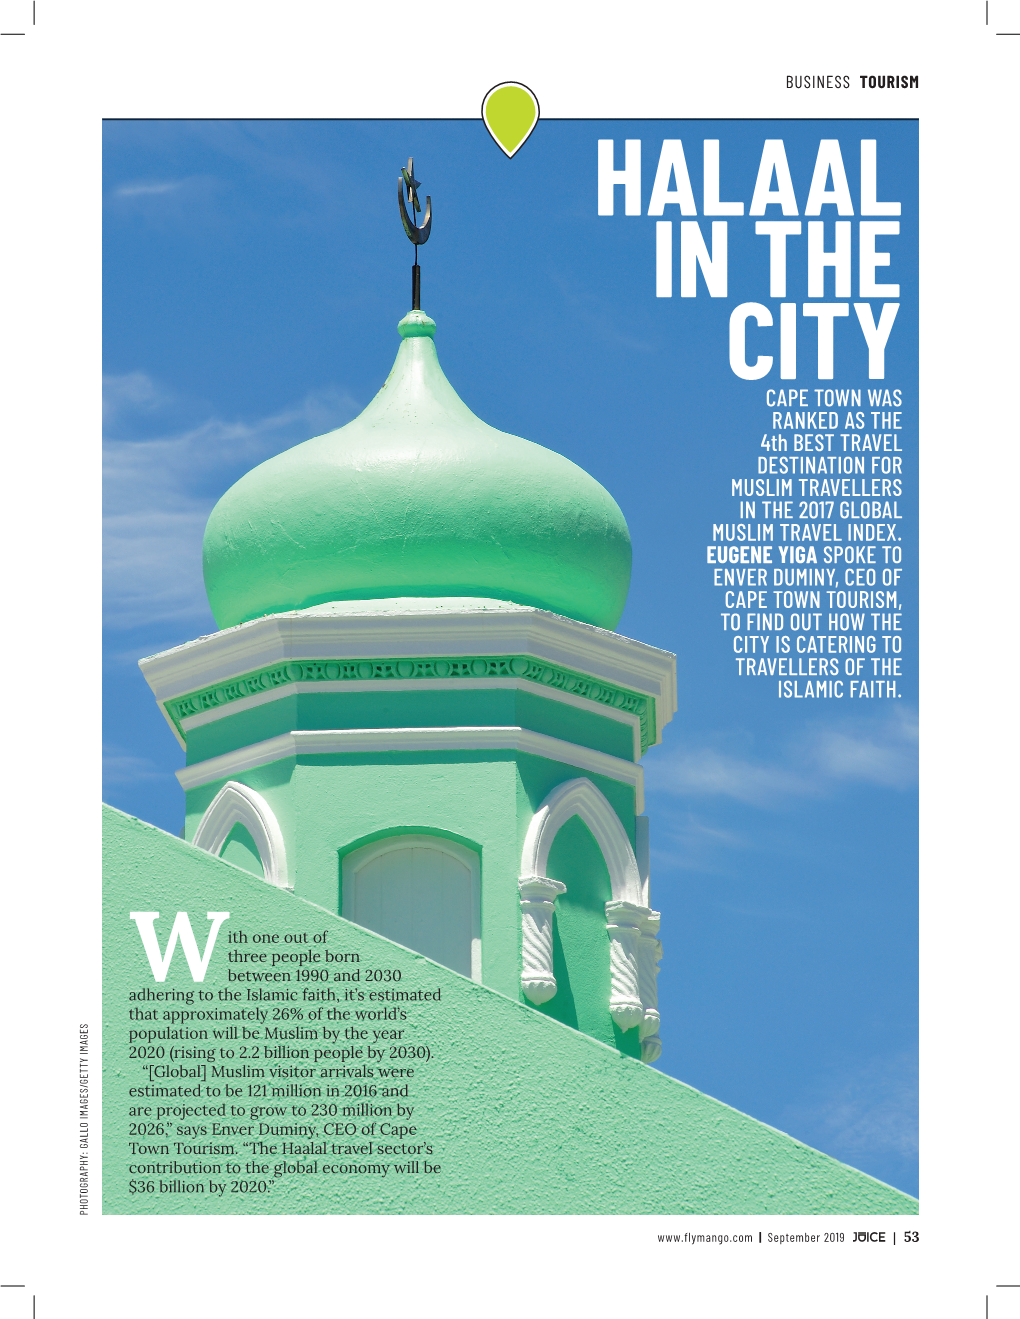 HALAAL in the CITY CAPE TOWN WAS RANKED AS the 4Th BEST TRAVEL DESTINATION for MUSLIM TRAVELLERS in the 2017 GLOBAL MUSLIM TRAVEL INDEX